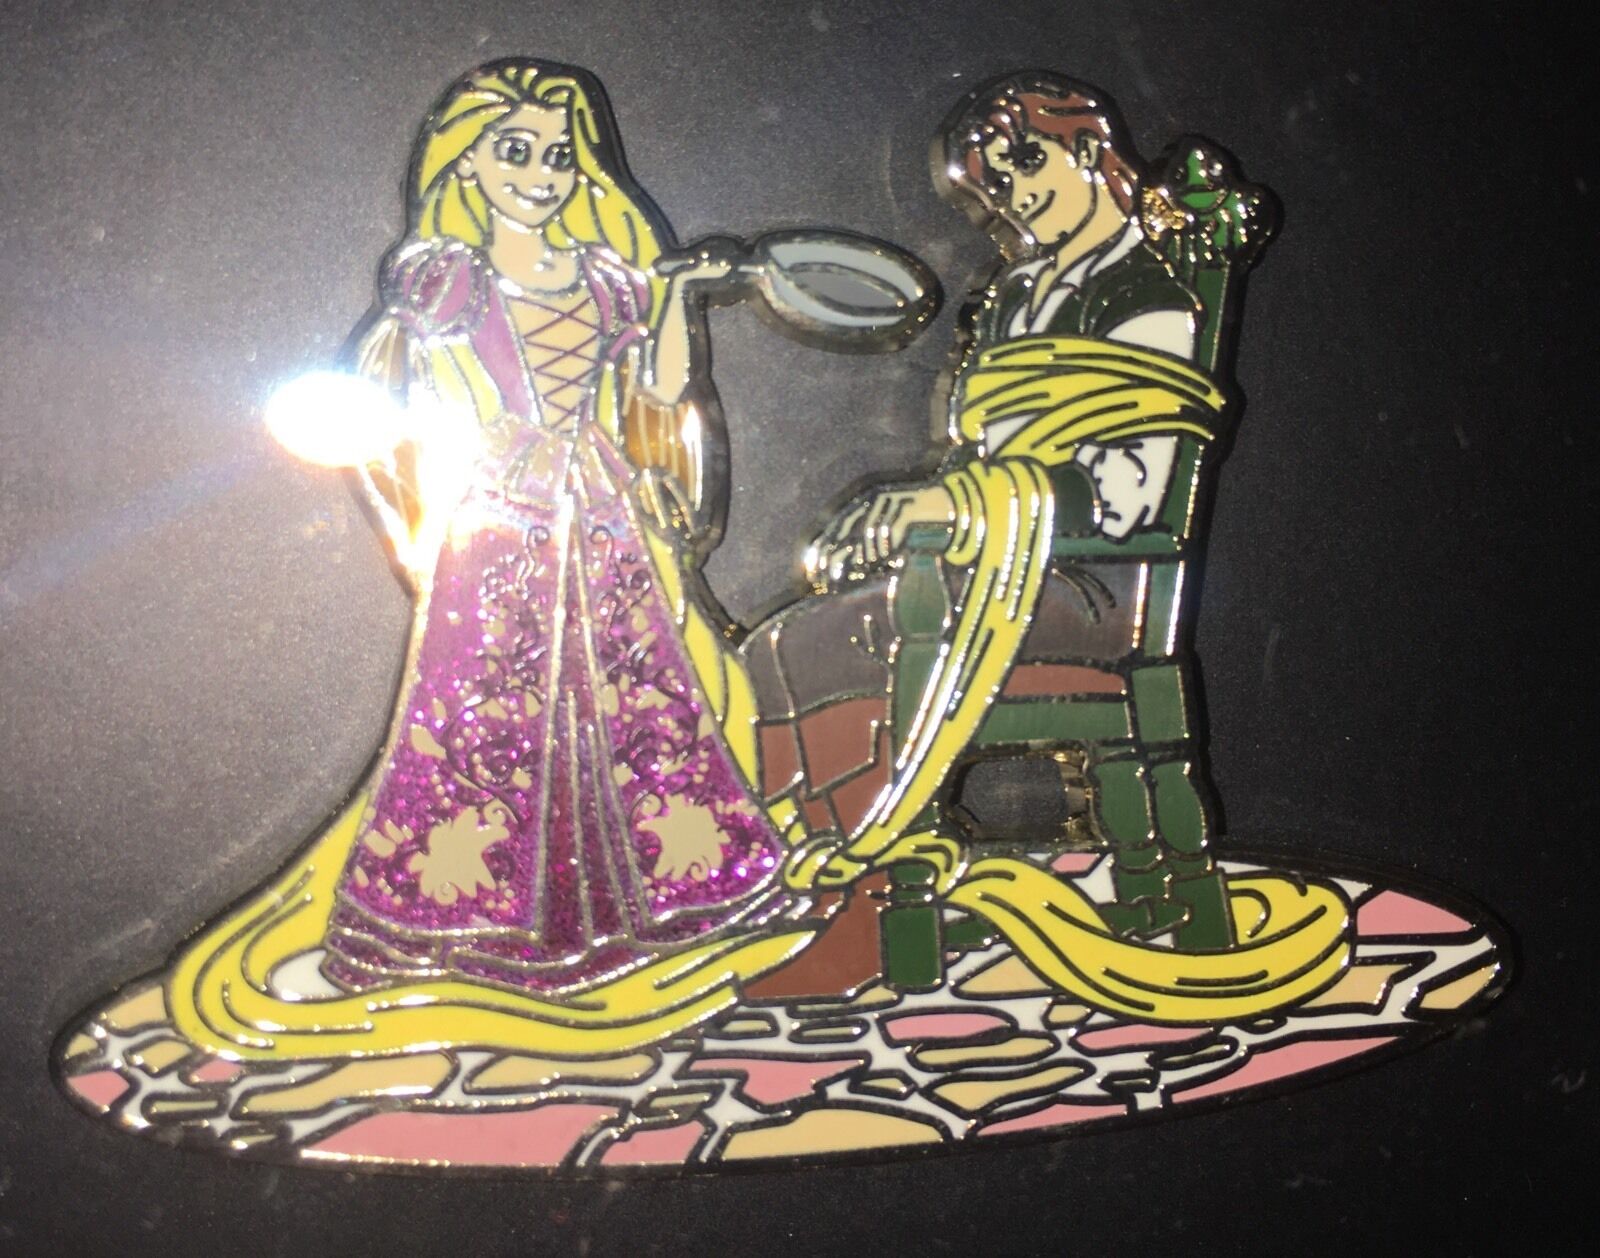 TANGLED DISNEY D23 EXPO EXCLUSIVE EVENT 2017 DESIGNER DOLL COLLECTION PIN